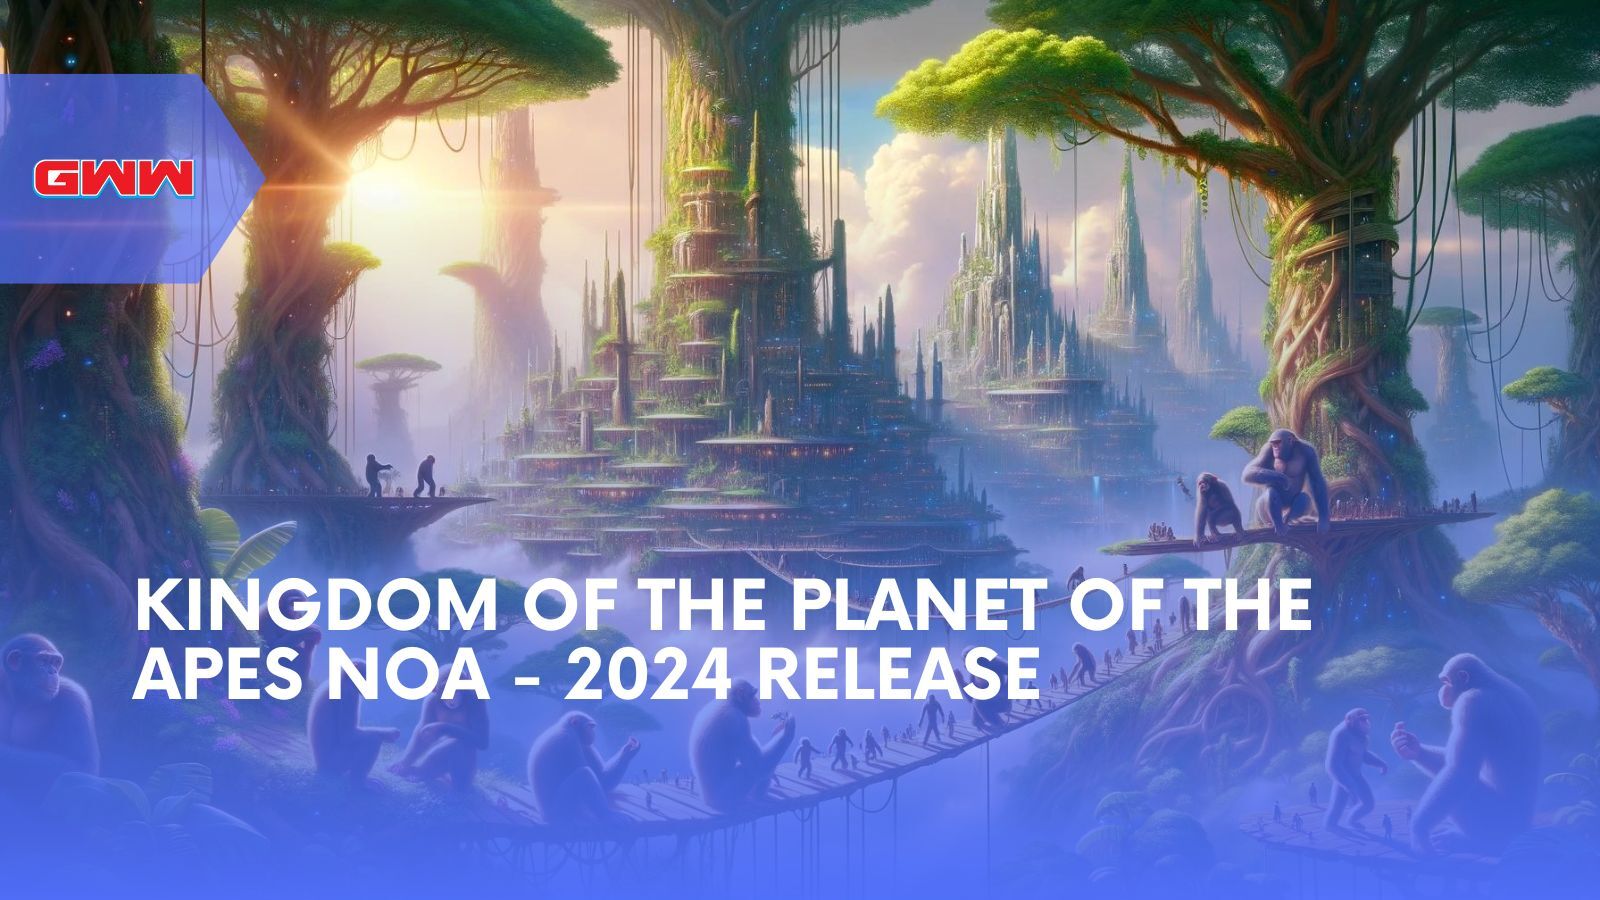 Kingdom of the Planet of the Apes Noa - 2024 Release